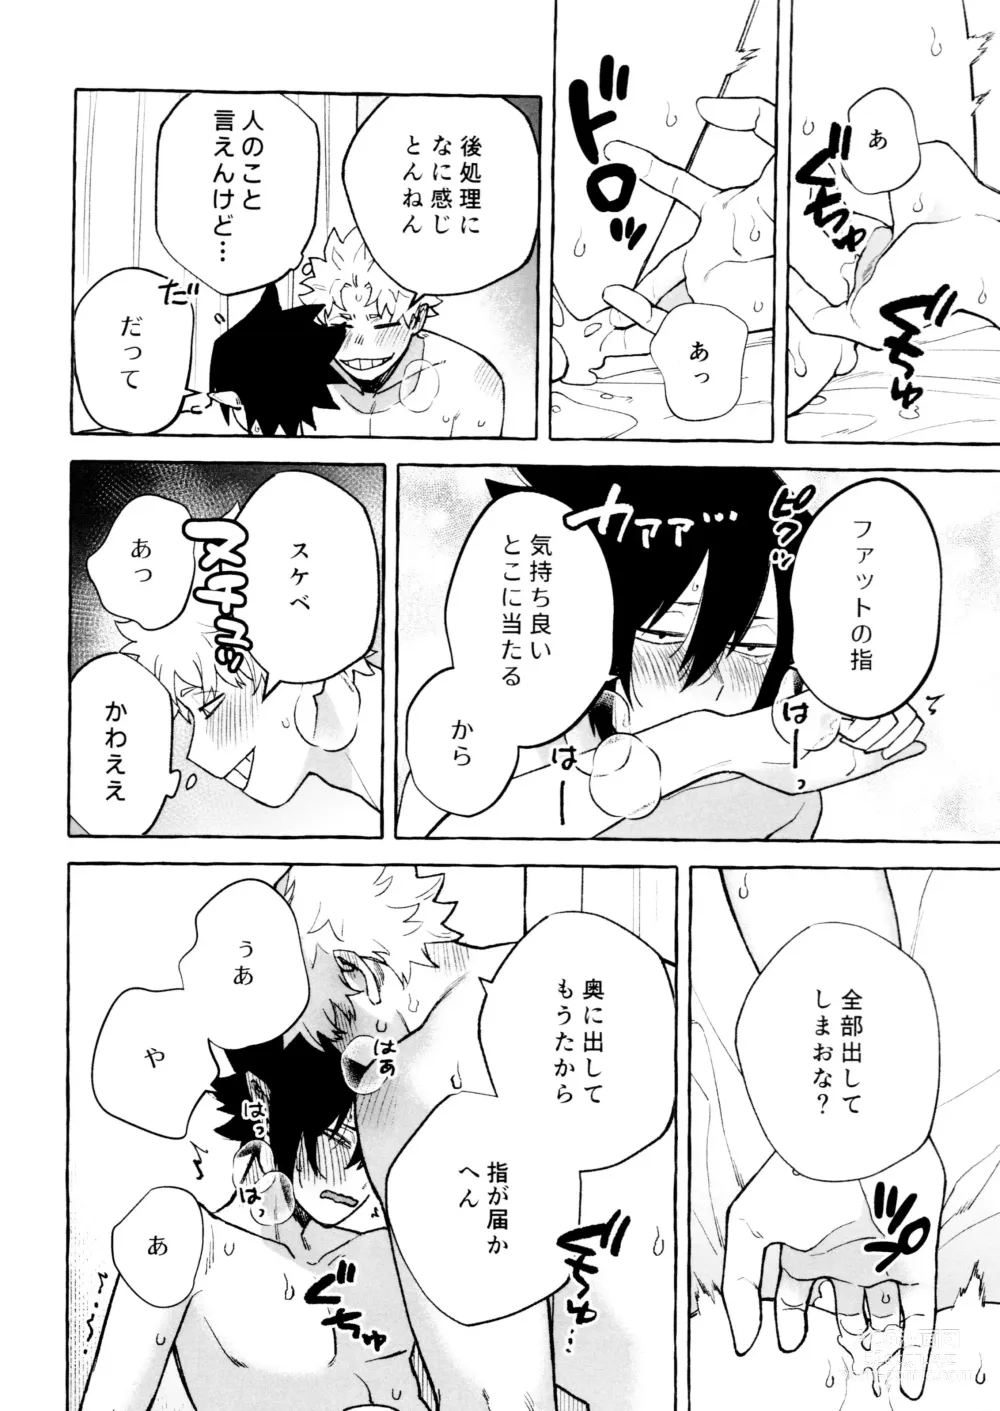 Page 28 of doujinshi Please please